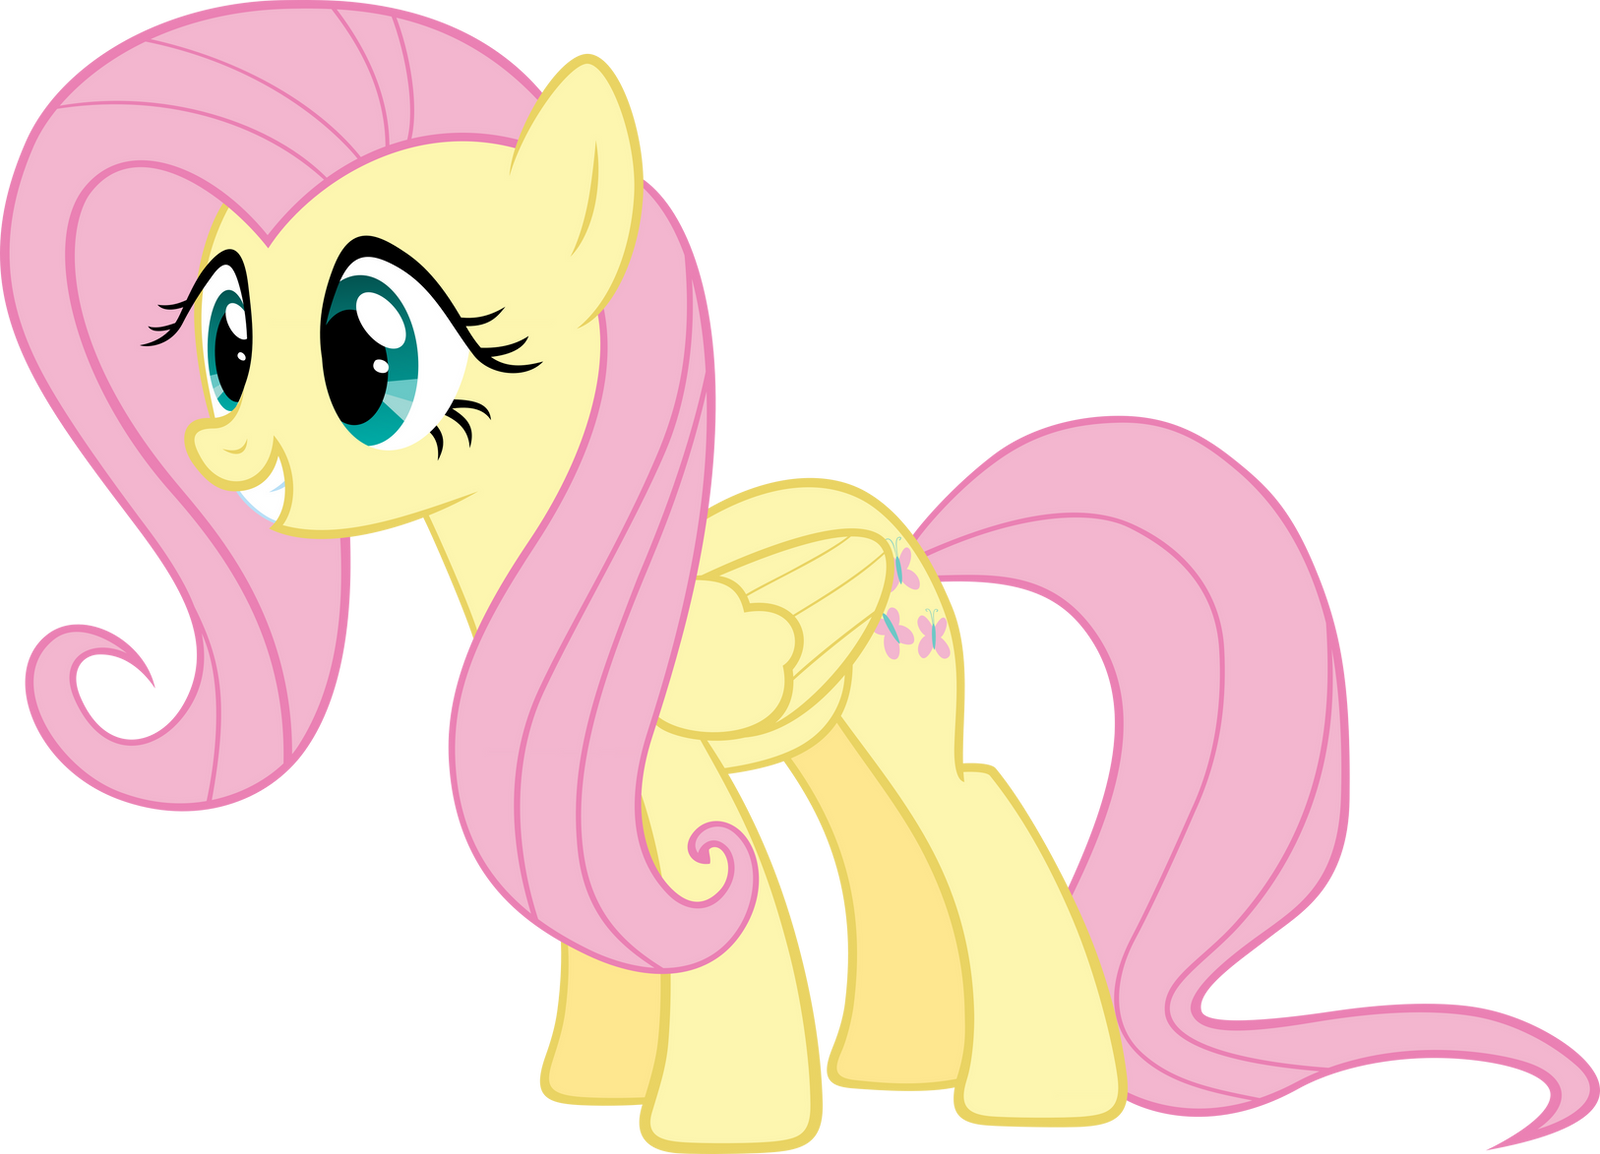 fluttershy_excited_by_myardius-d57ban2.p